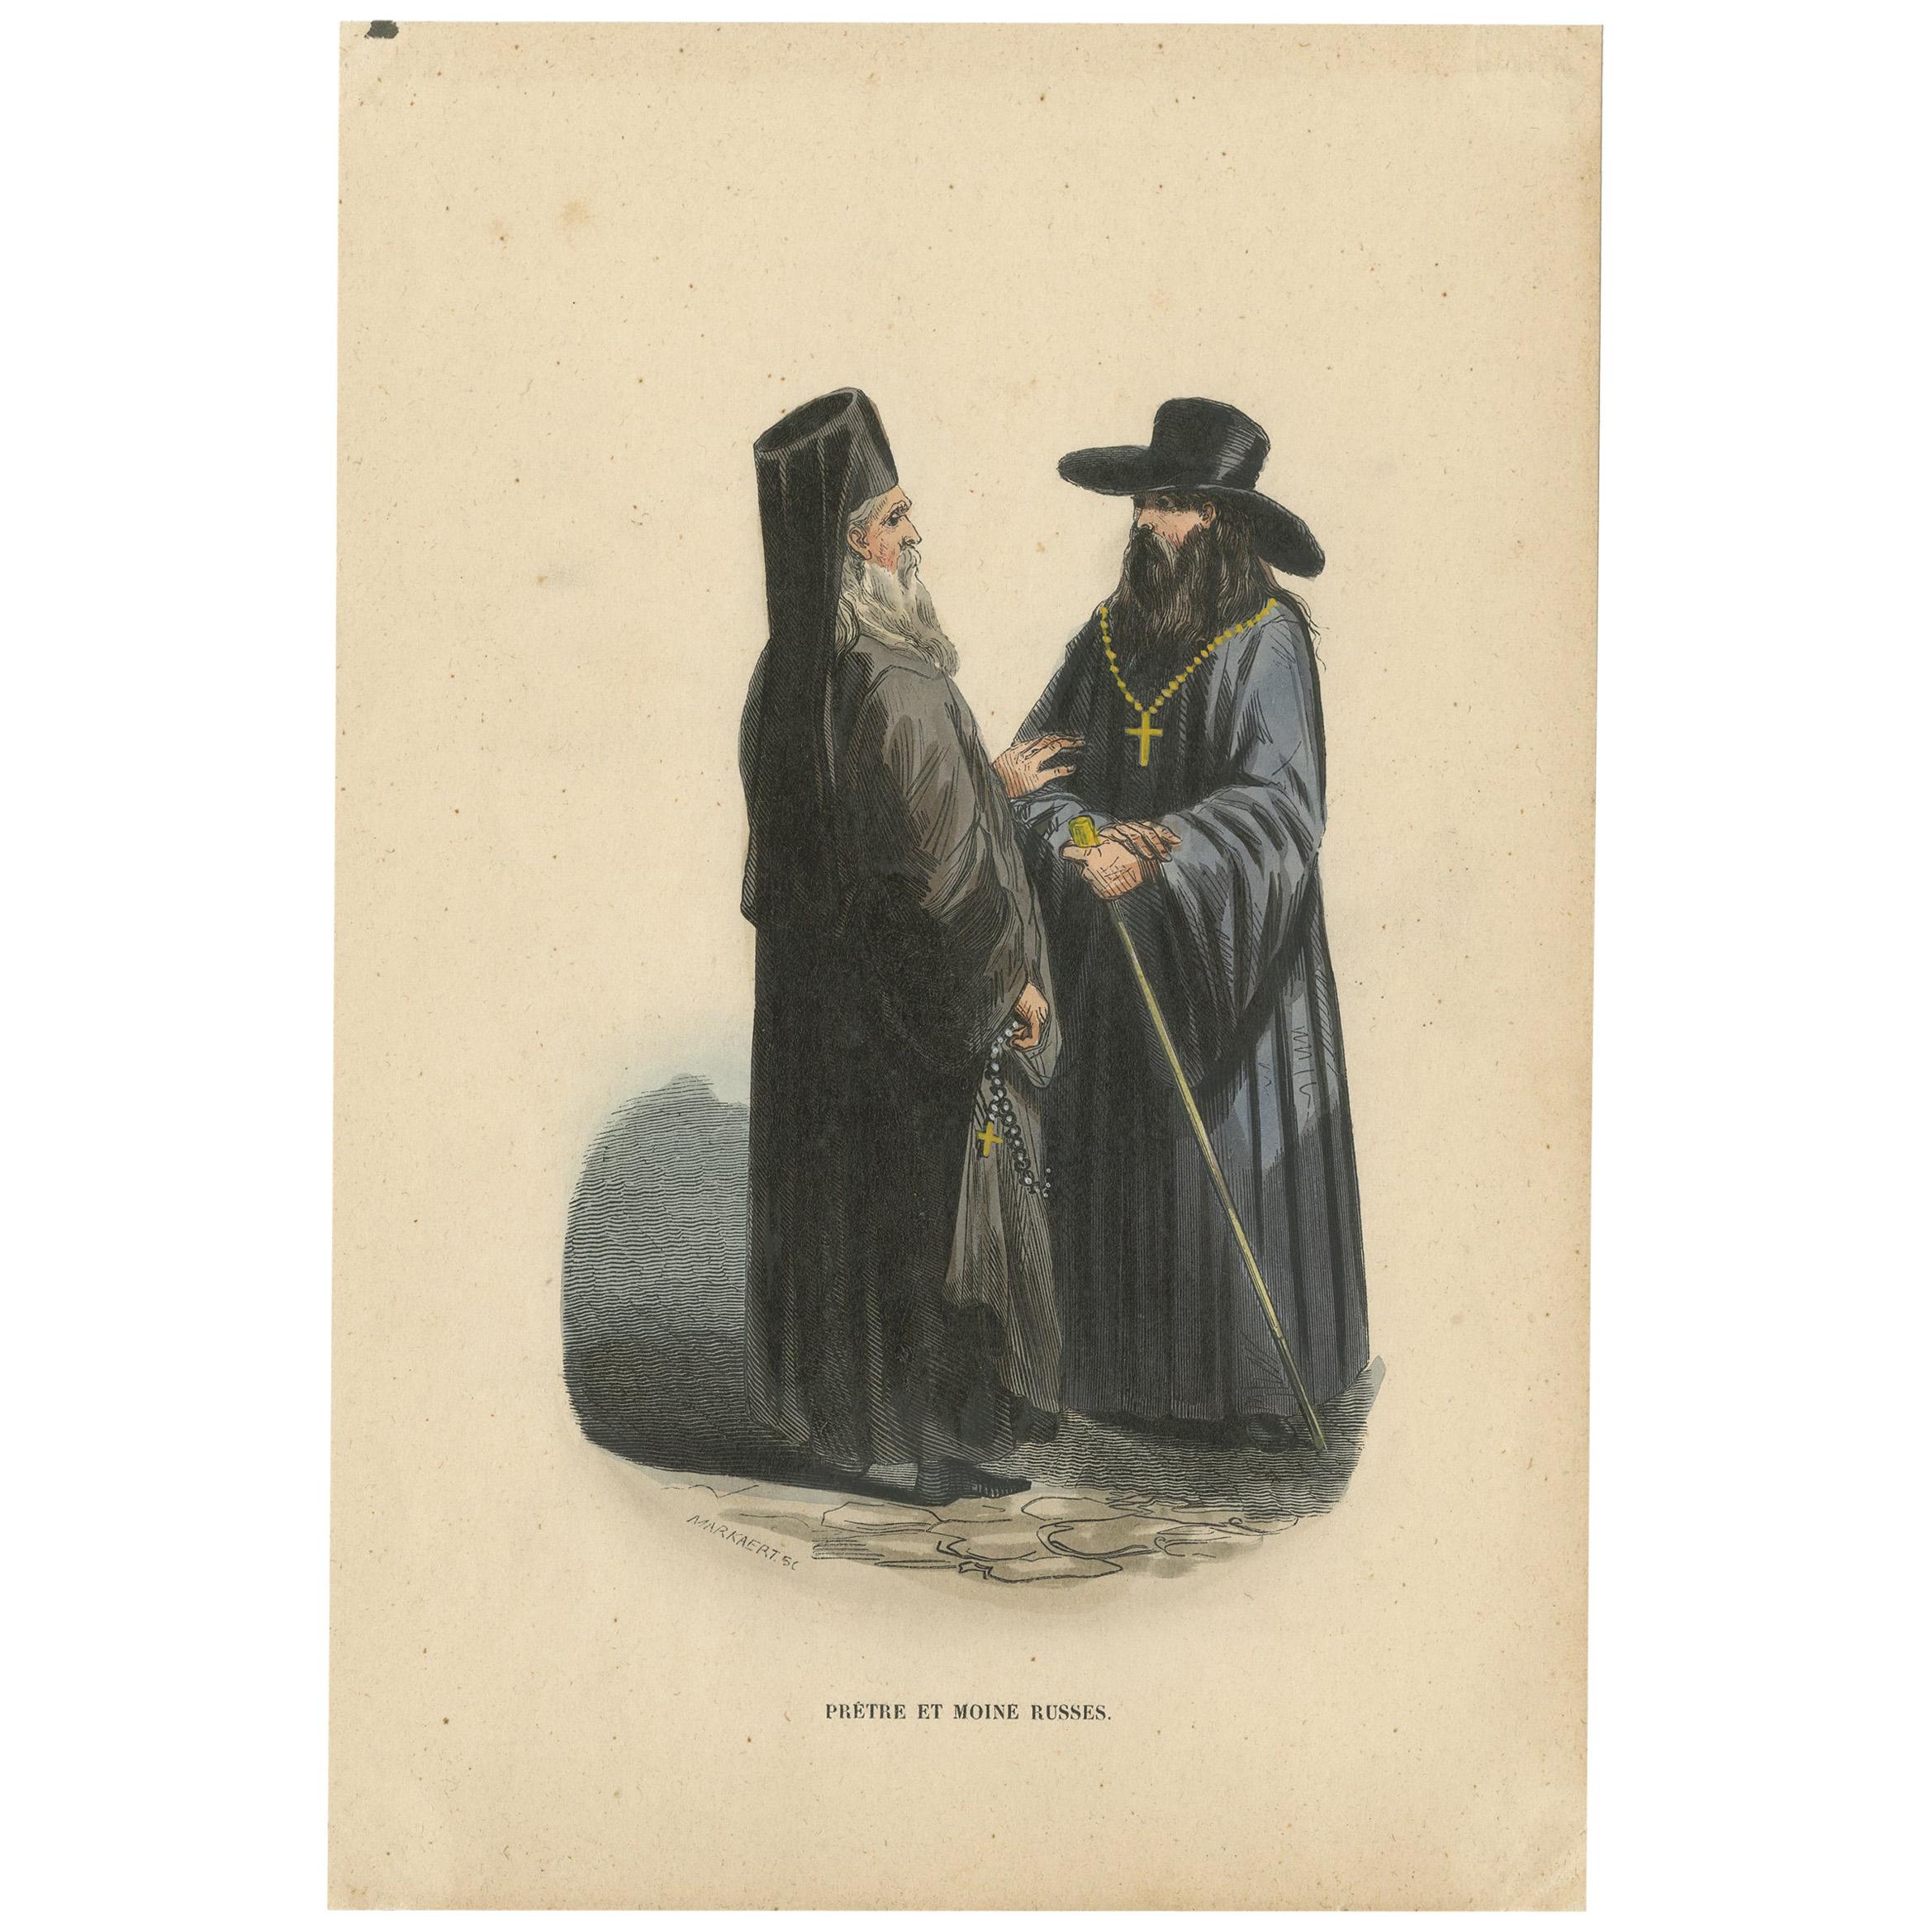 Antique Costume Print of a Priest and Monk from Russia by Wahlen, 1843 For Sale